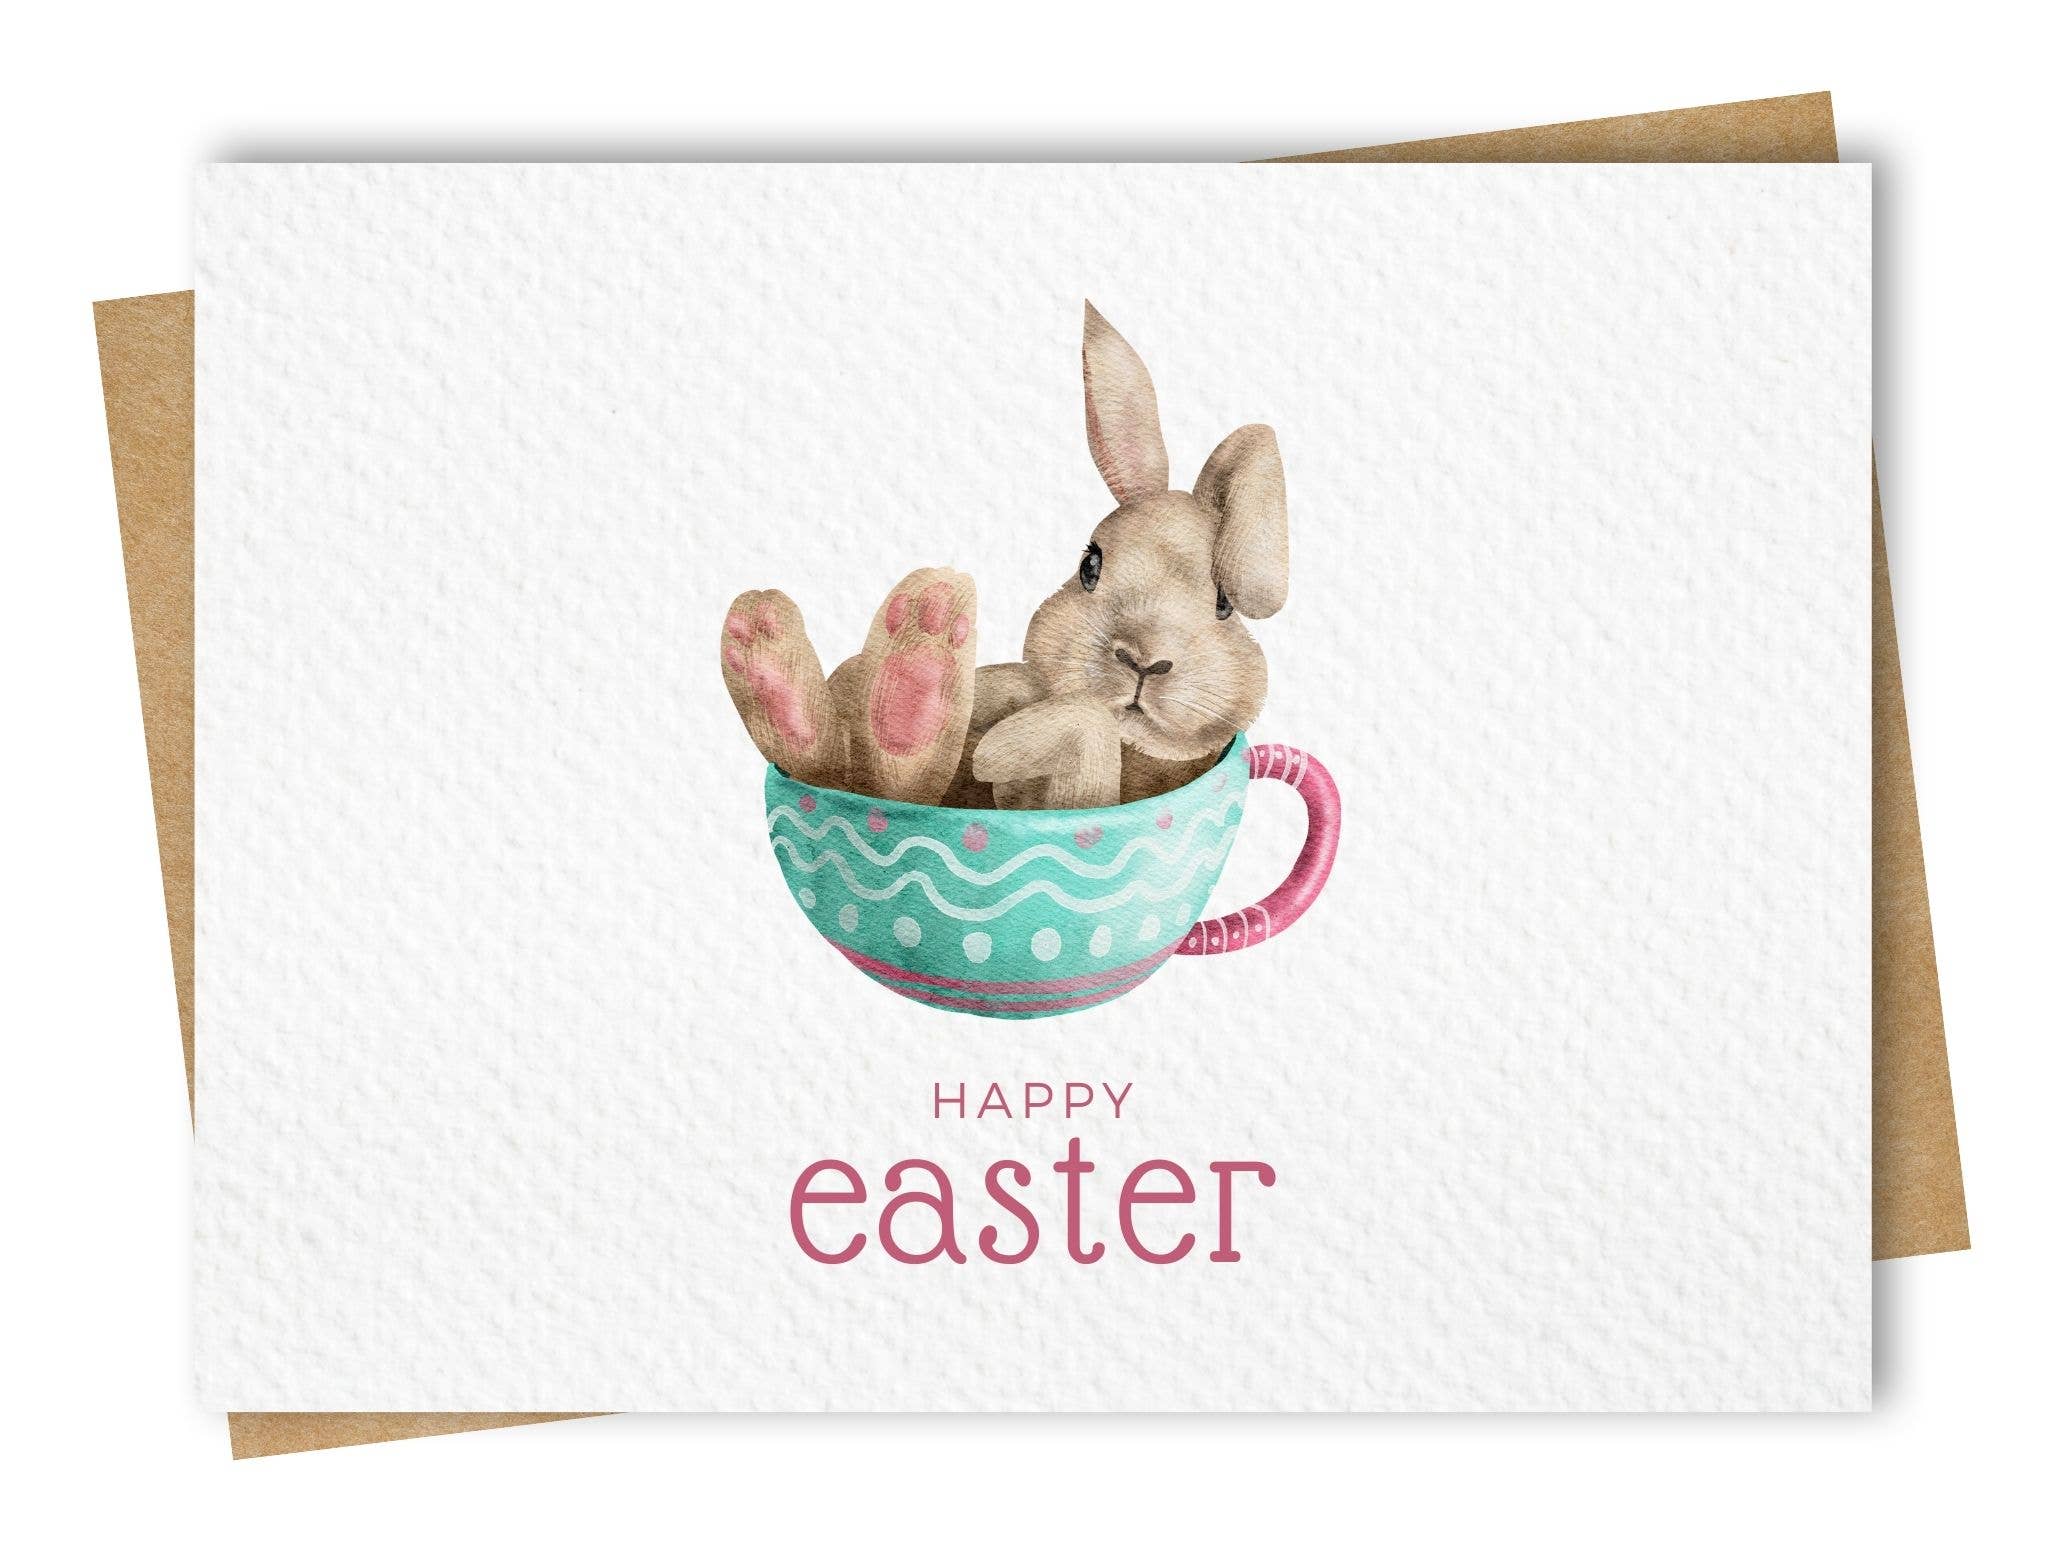 Cute Baby Bunny in Mug Easter Card, Includes Kraft Envelope: Rounded